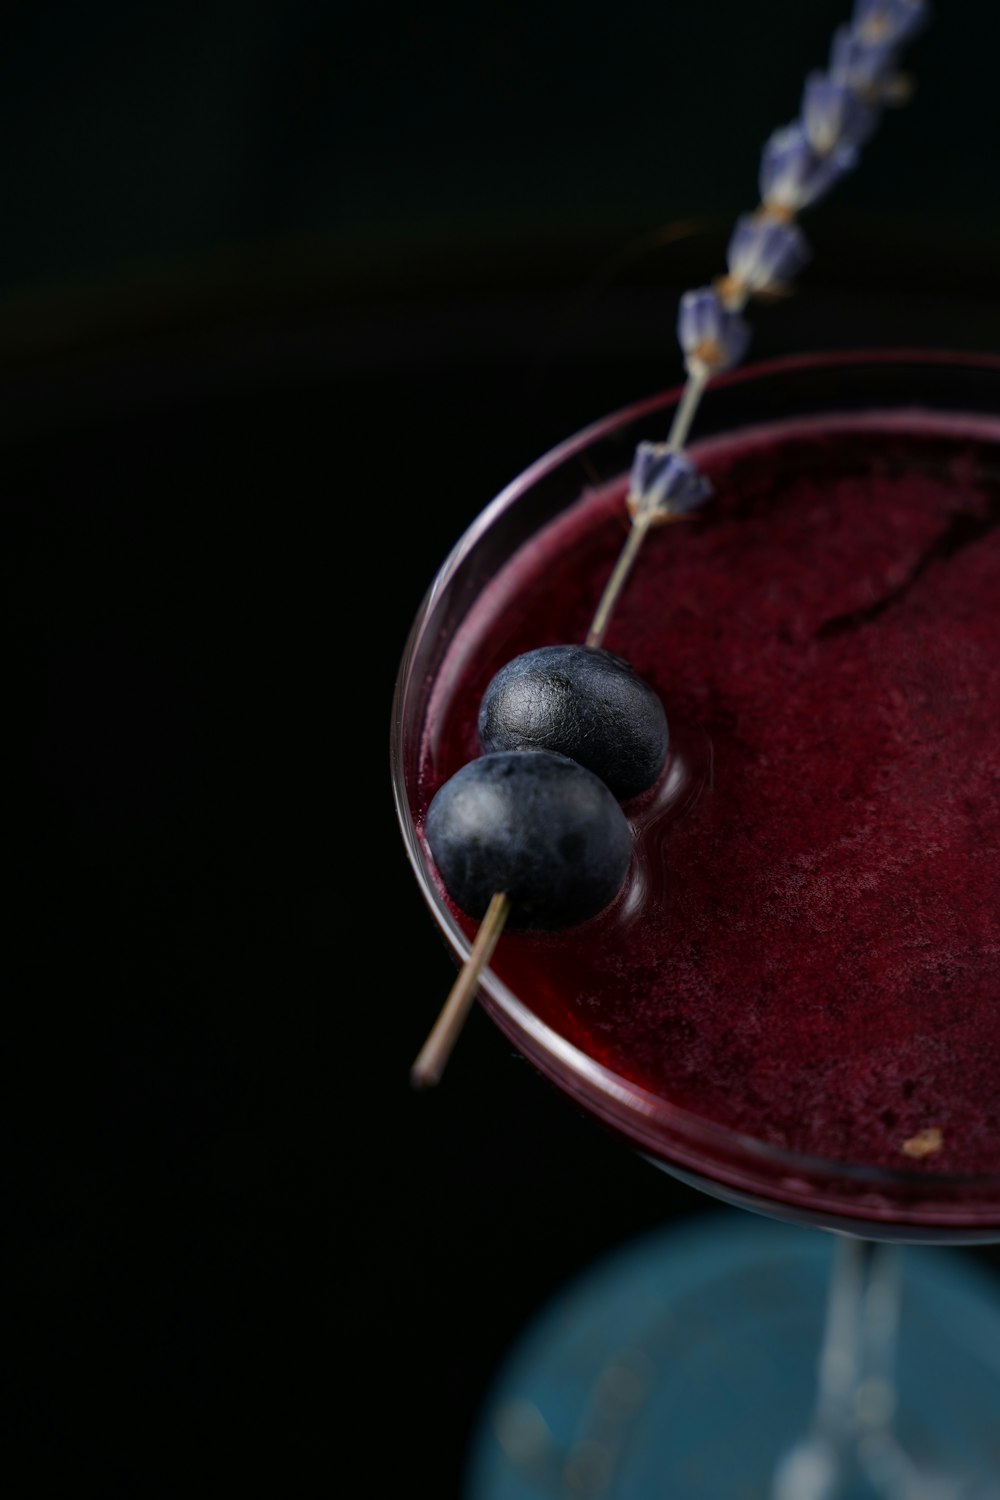 black round fruit on red round plate